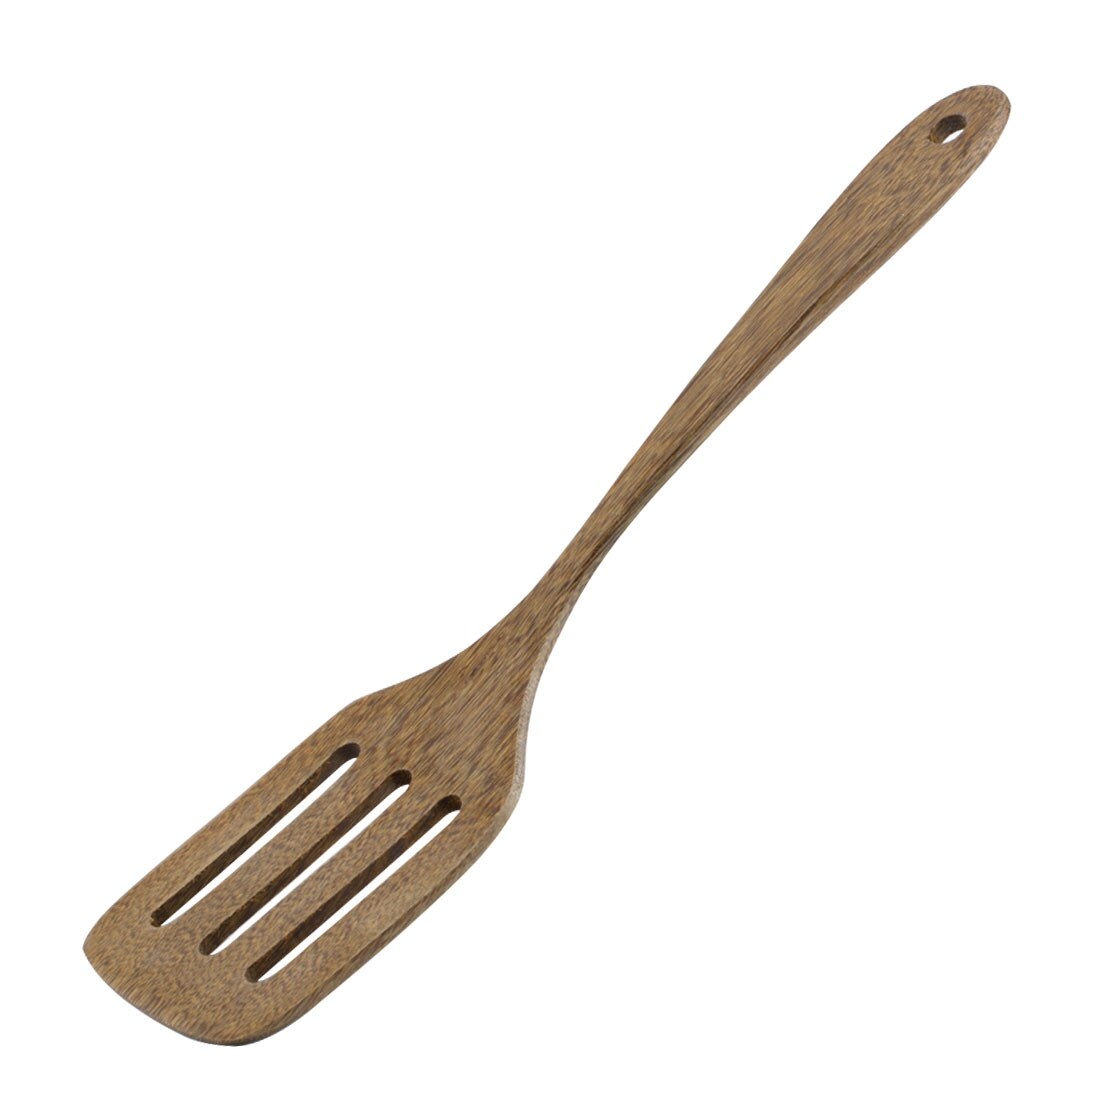 slotted wooden spatula